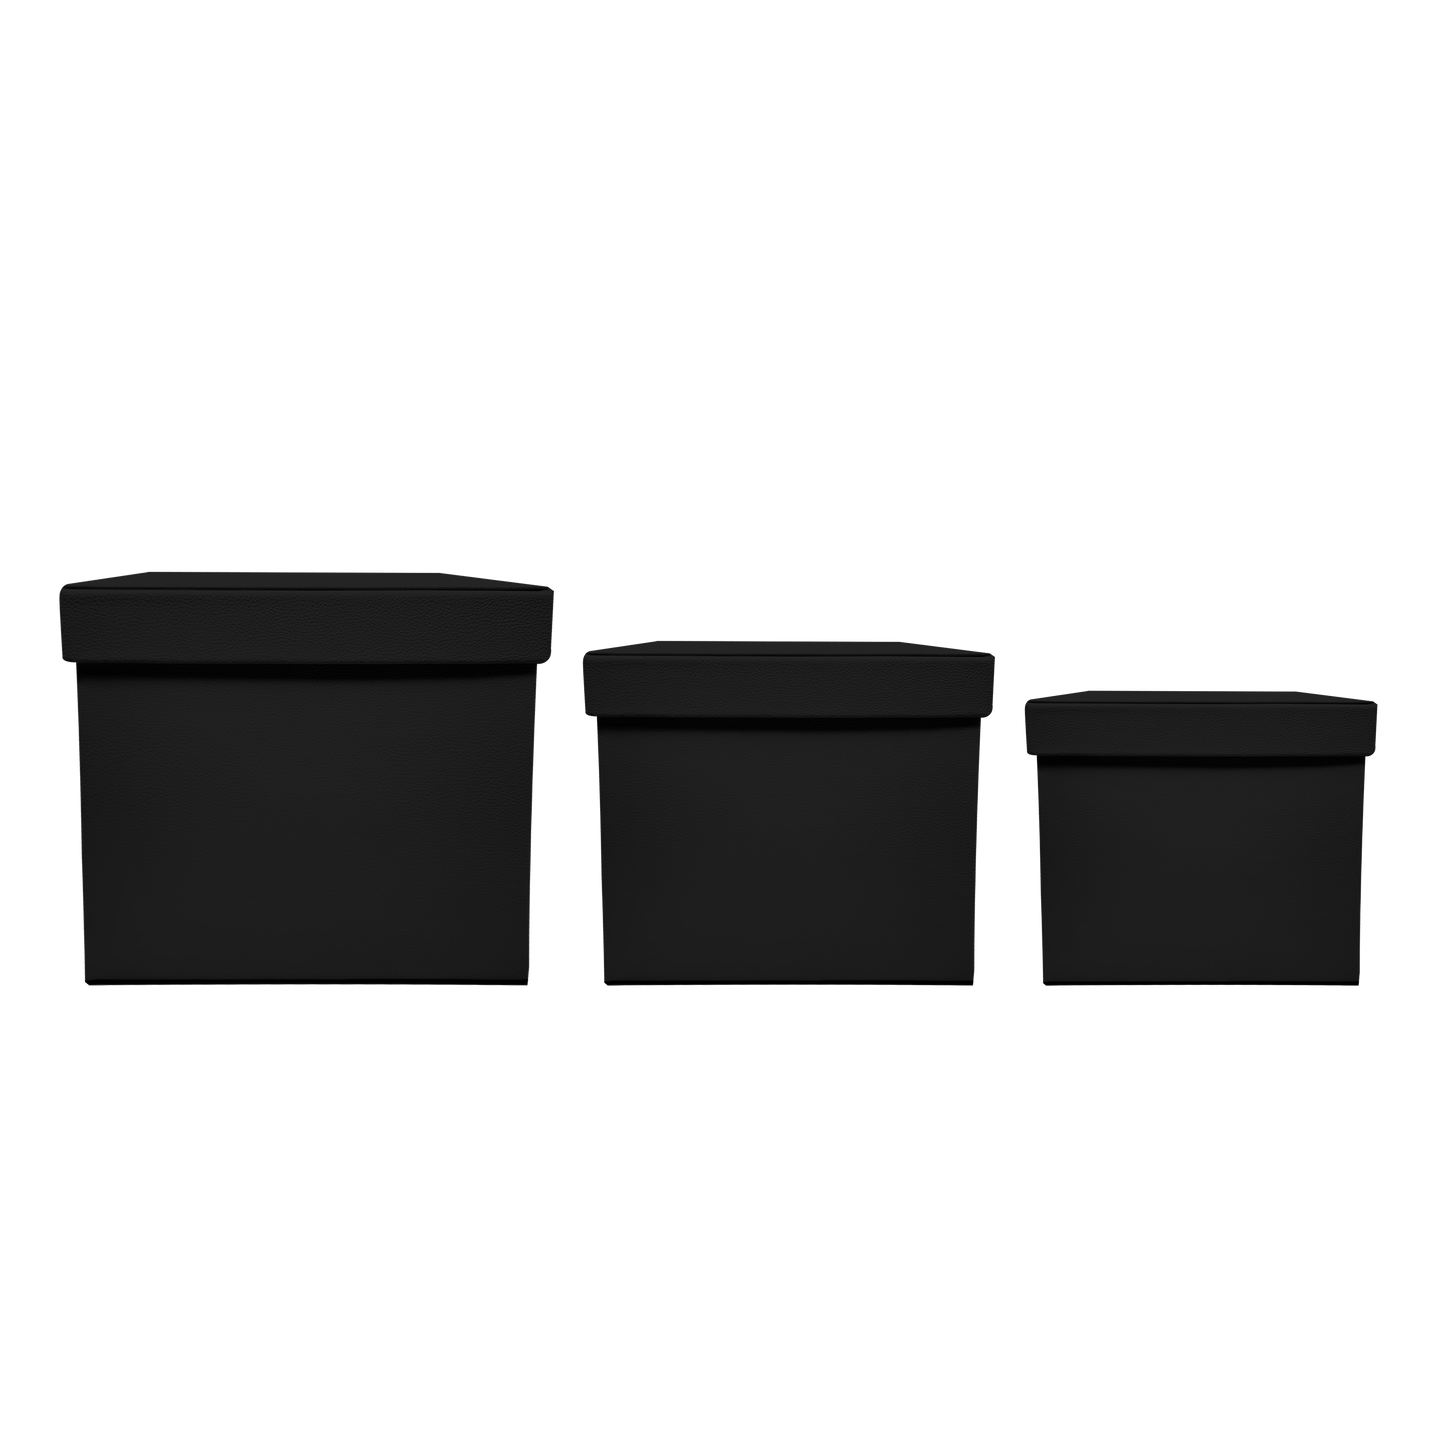 Kit 3 different sizes square shape boxes 3 in 1 - PU Leather Black